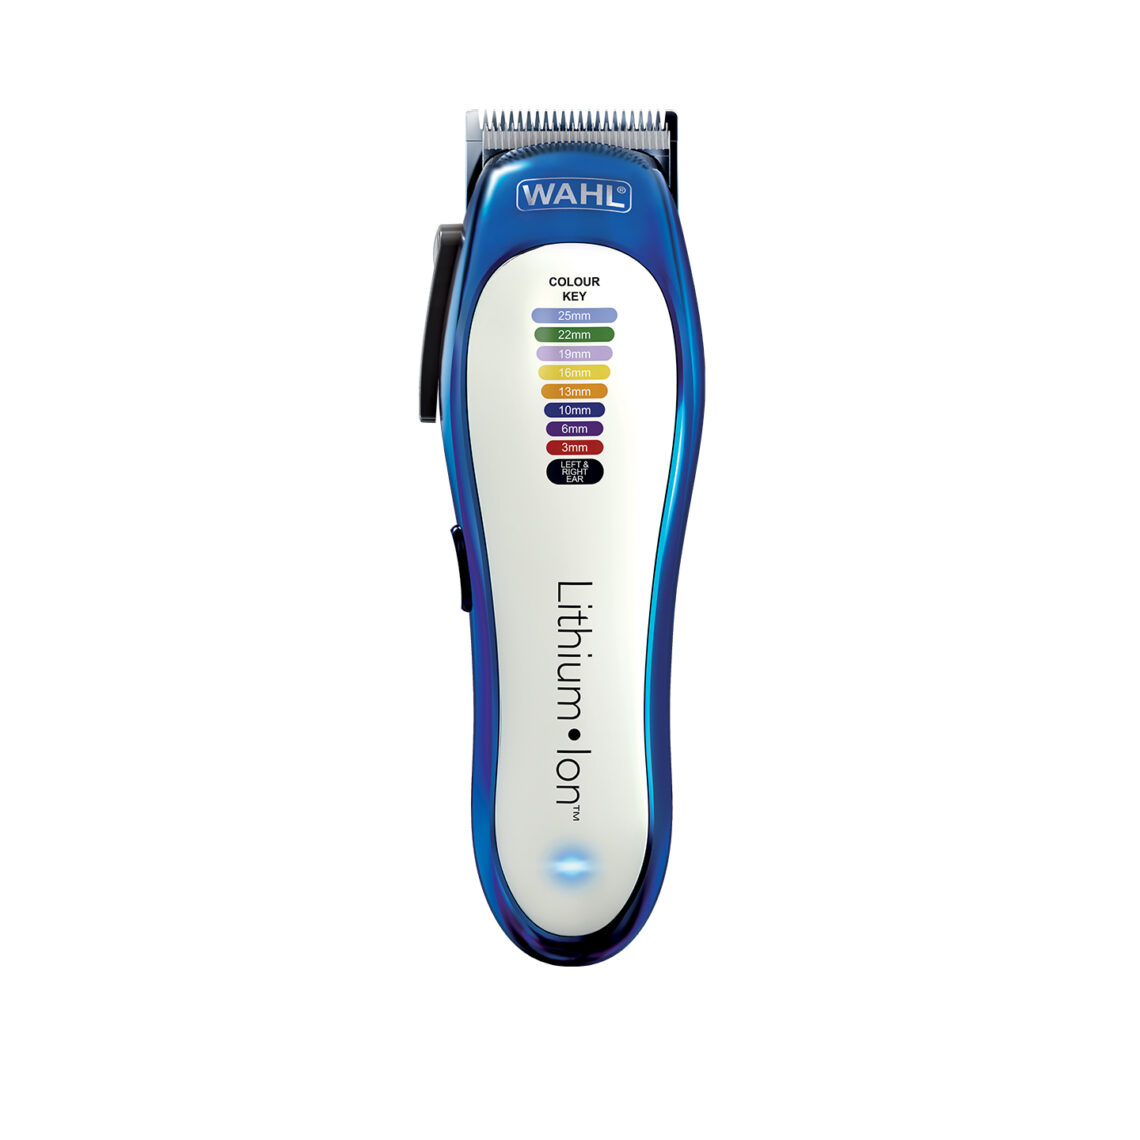 Colour Pro Lithium Clippers | Men's Grooming | Wahl UK